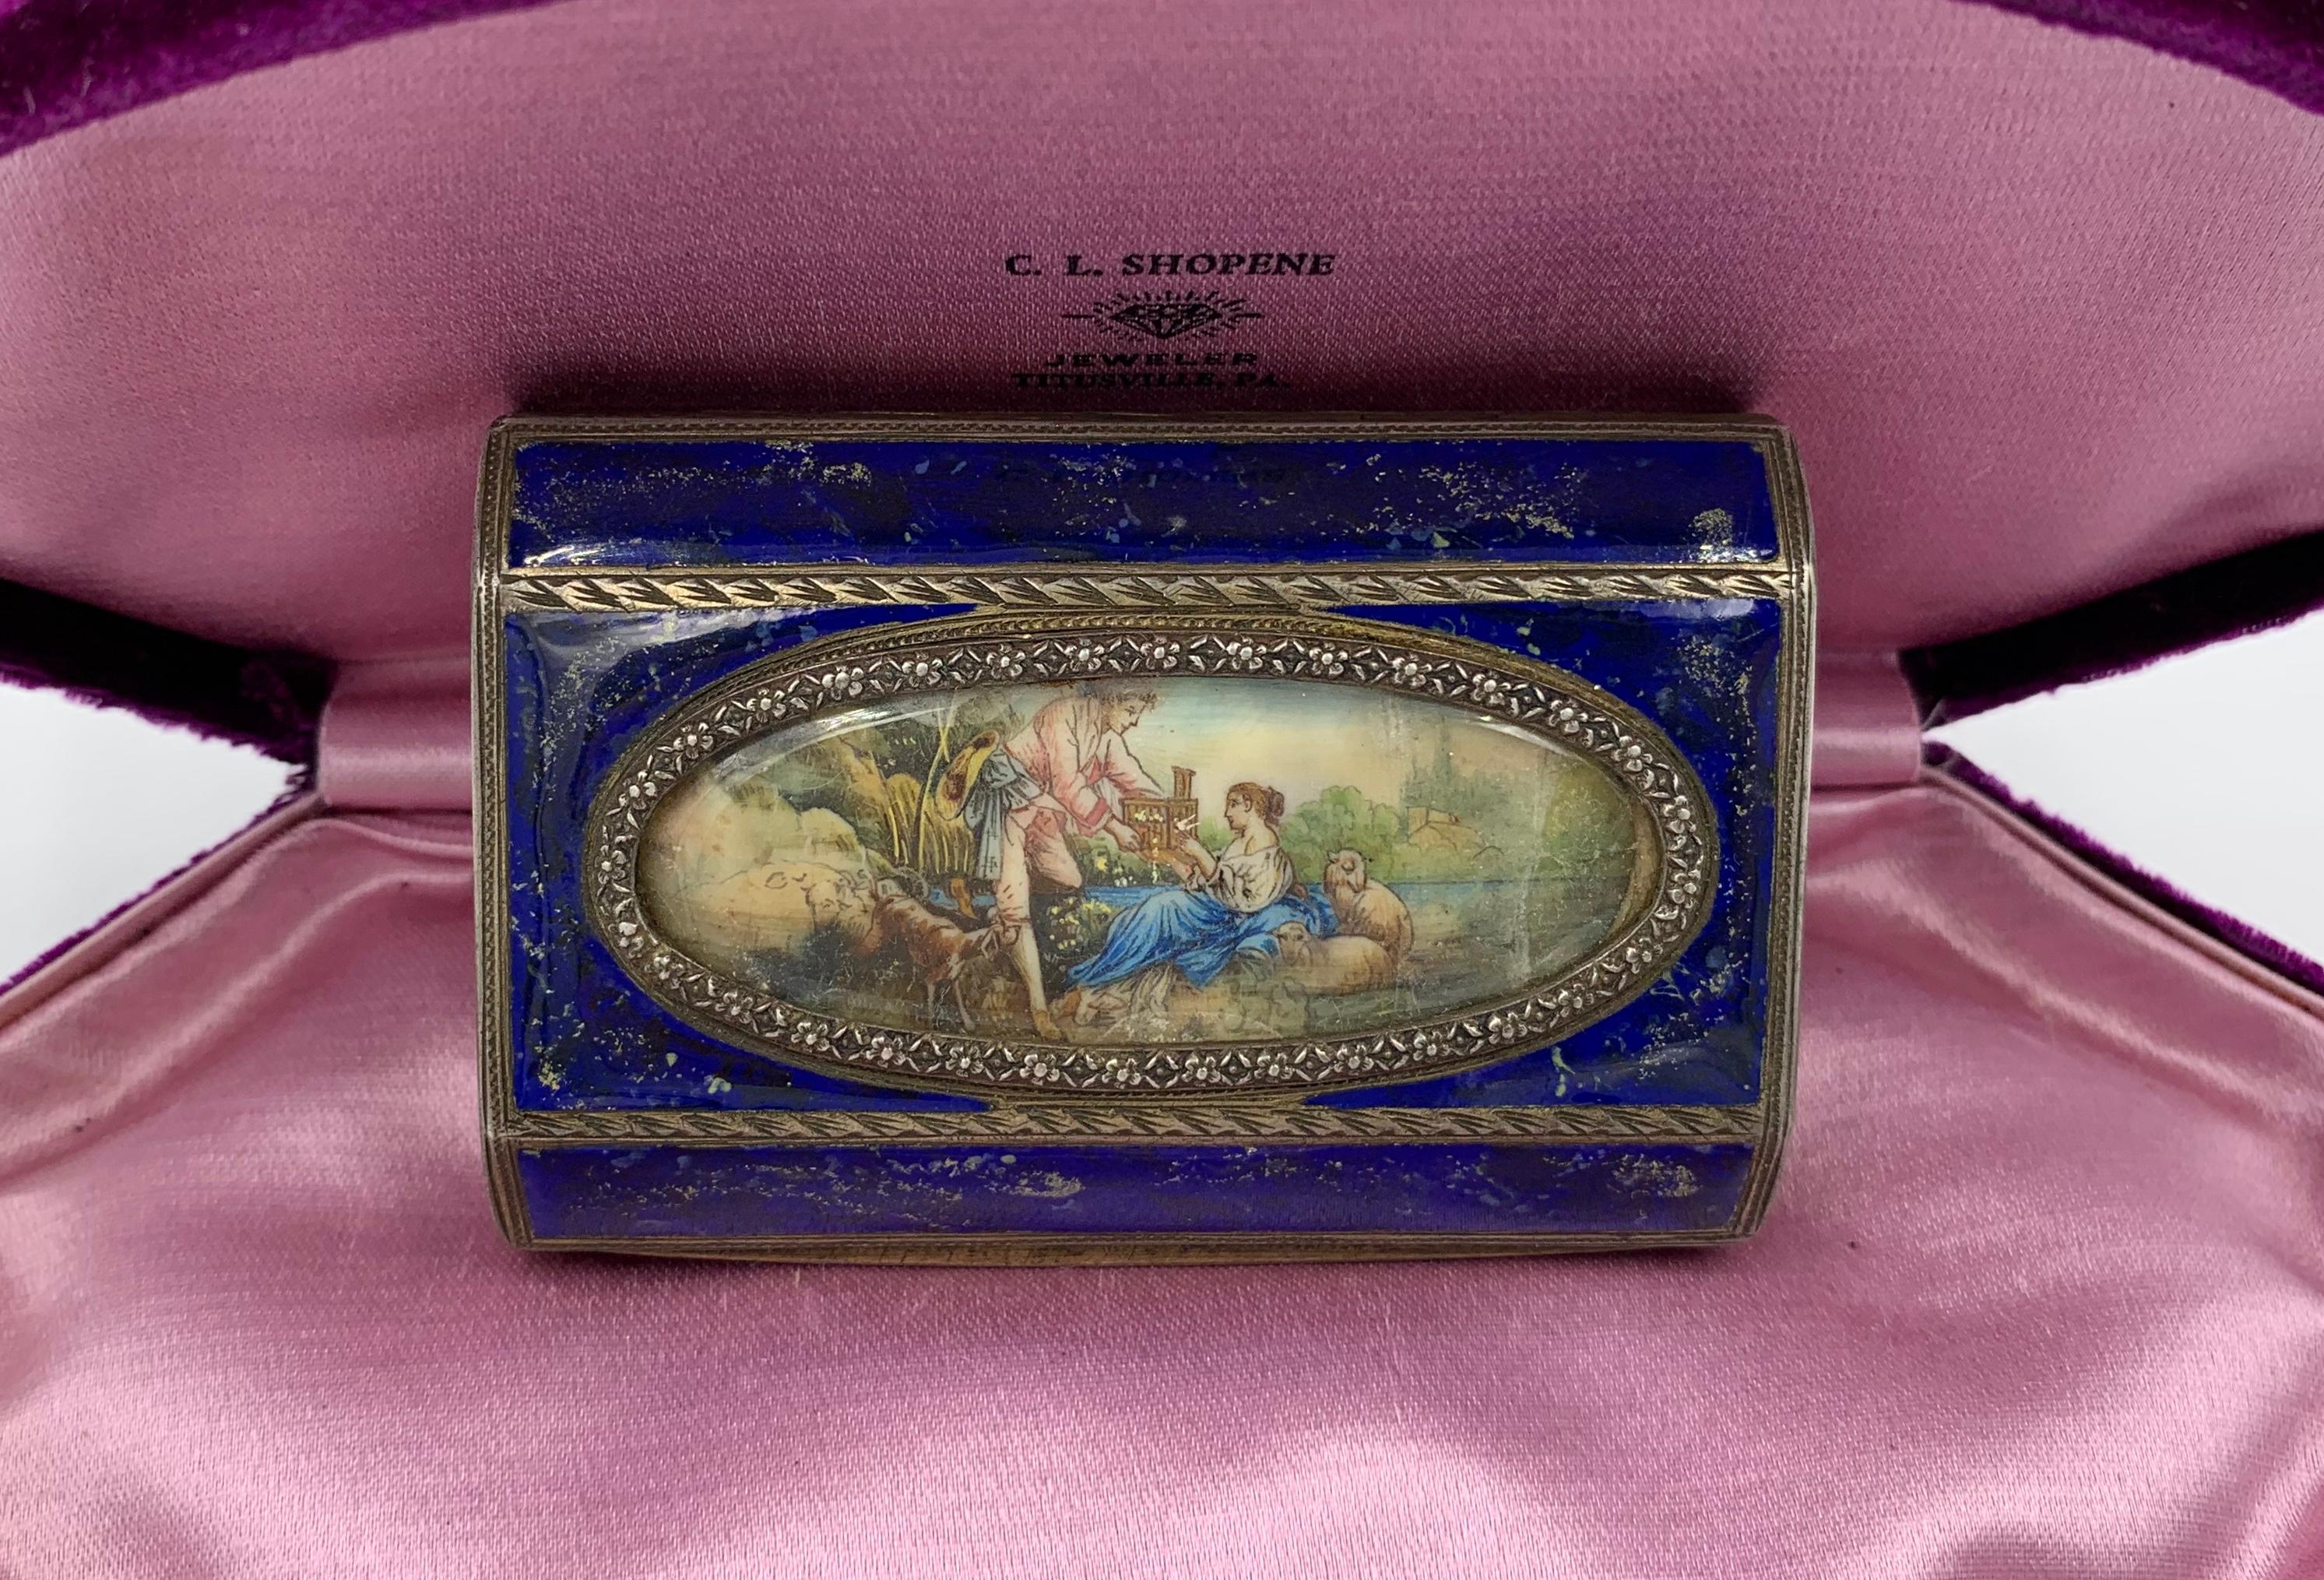 A stunning antique Victorian box decorated with Royal Blue Enamel with gold flecking throughout creating a Lapis Lazuli effect.  In the center of the box is a very special hand painted miniature painting.  The painting depicts a pair of courting